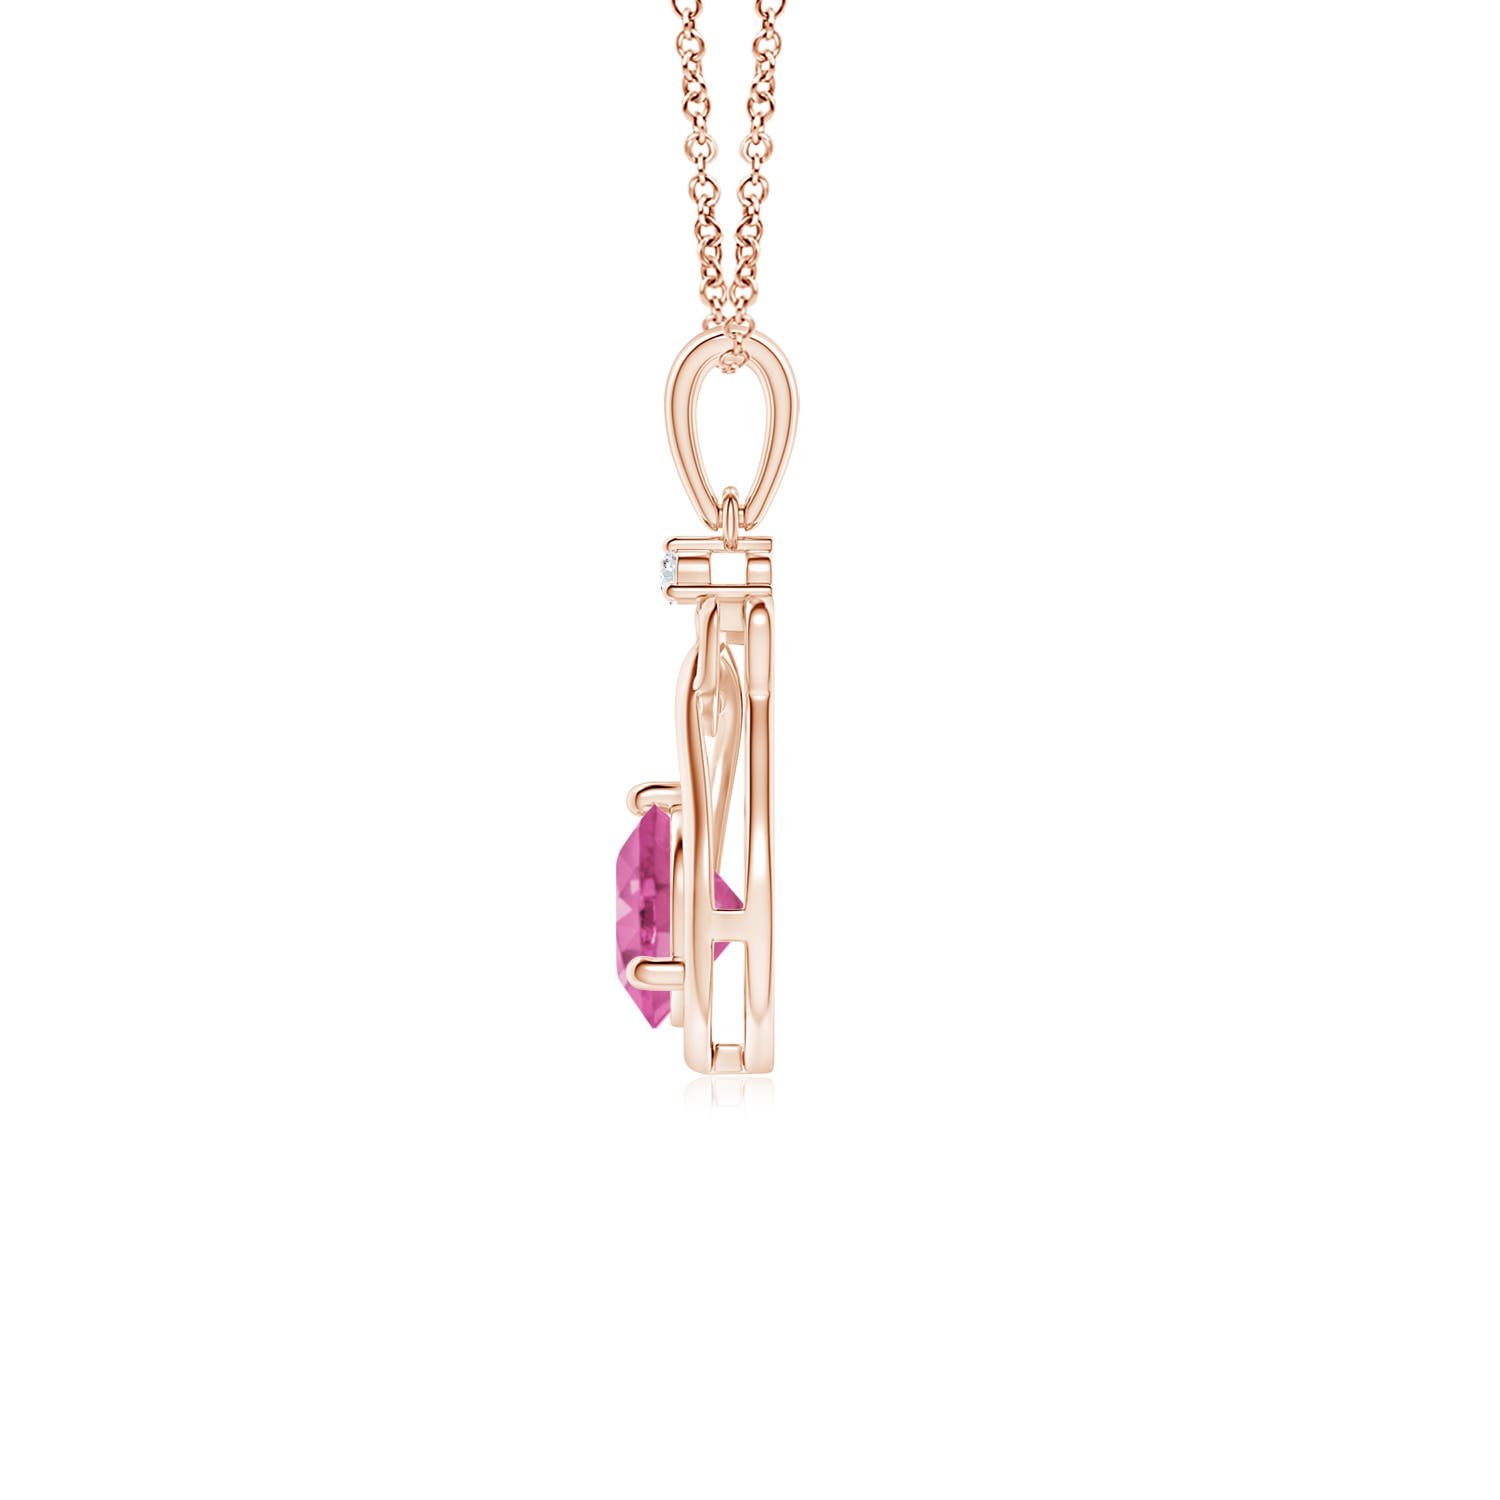 AAA - Pink Sapphire / 0.61 CT / 14 KT Rose Gold